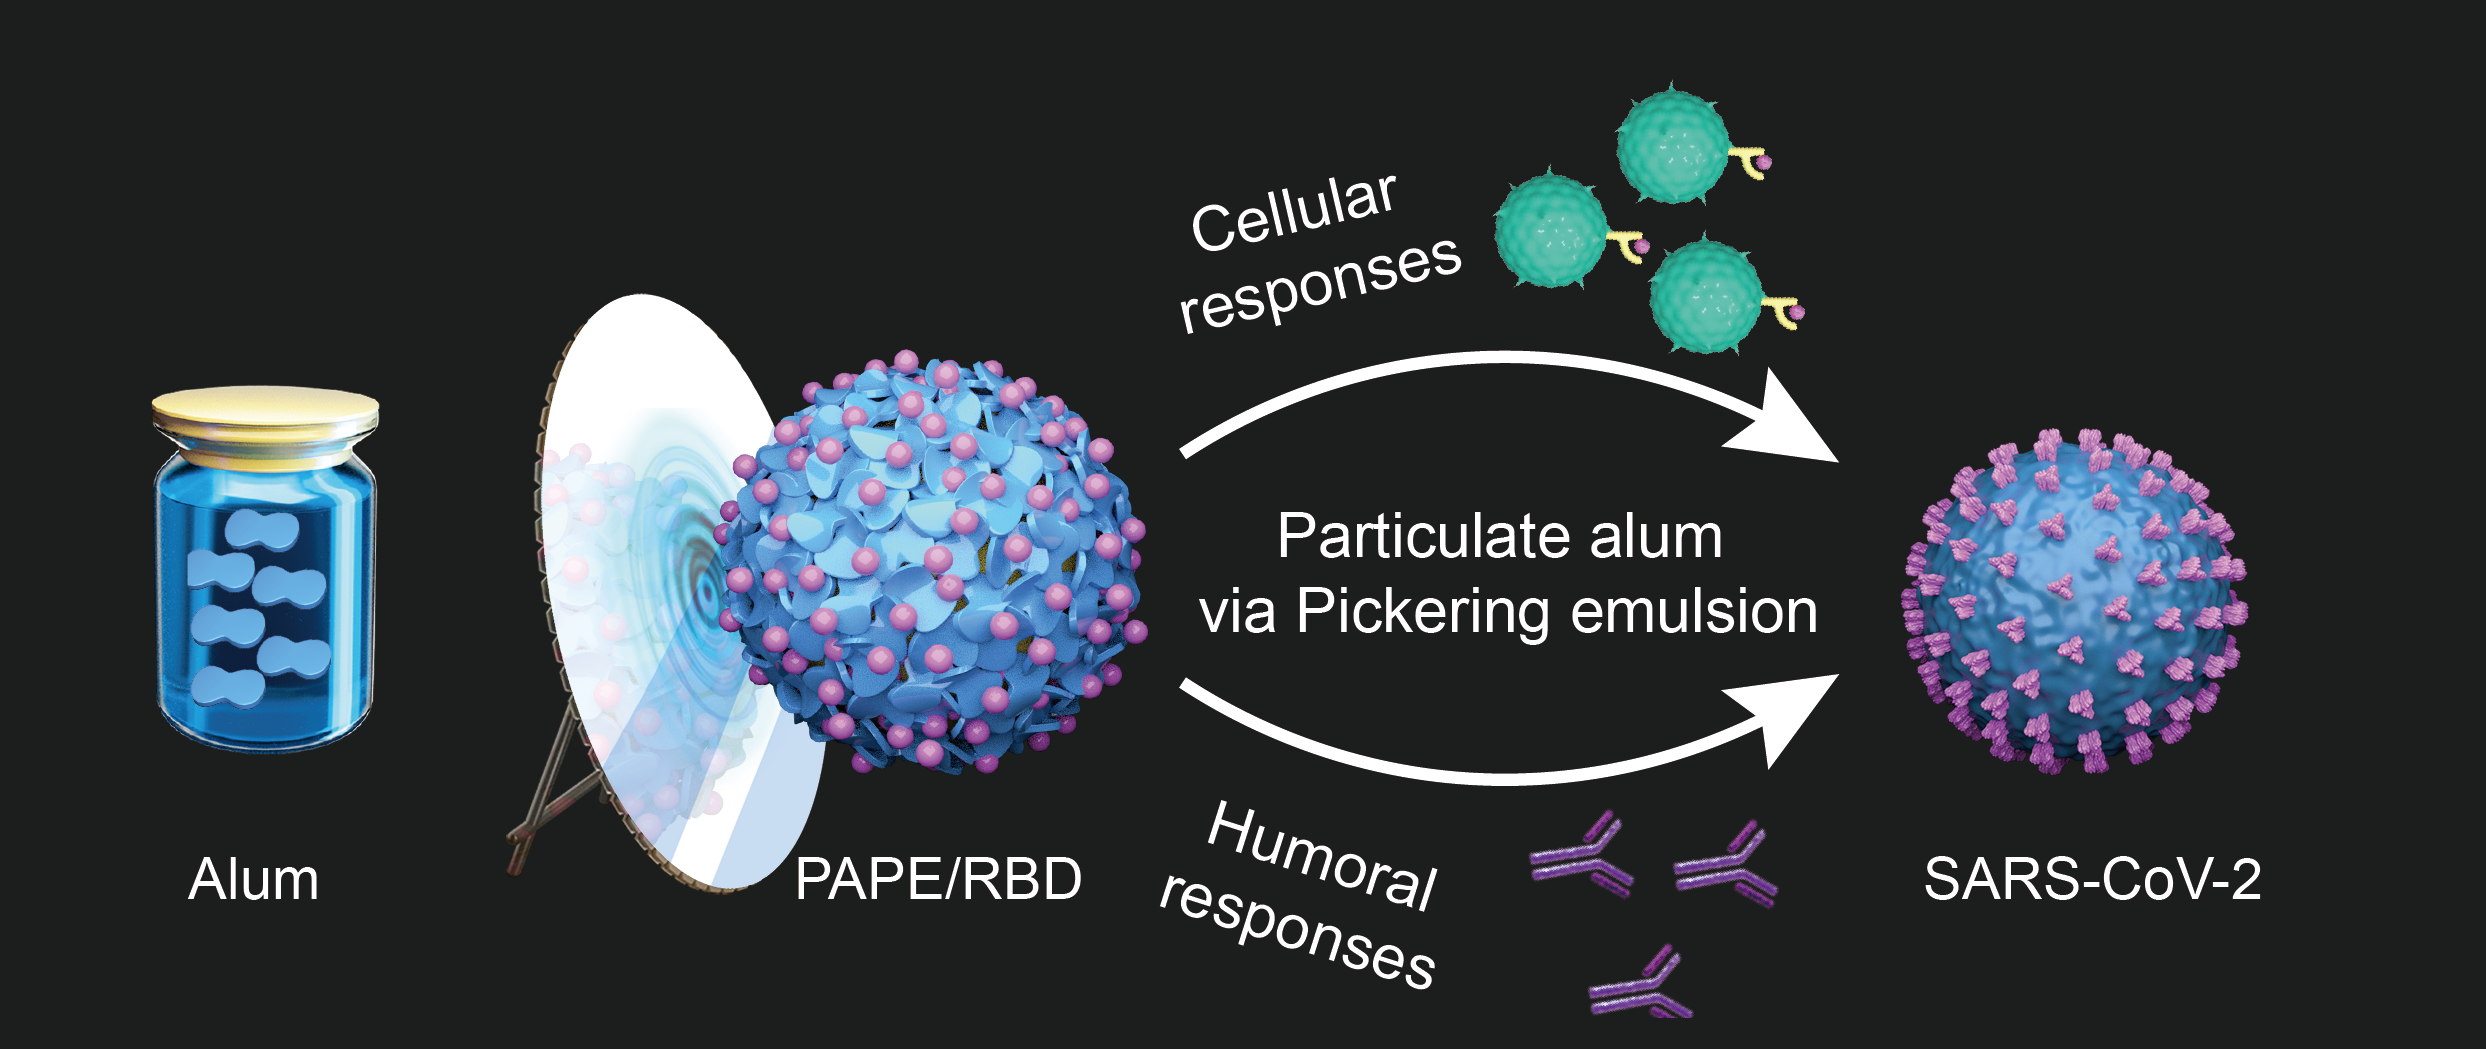 Particulate Alum Pickering Emulsion as Adjuvant May Enhance Performance of SARS-CoV-2 Vaccine